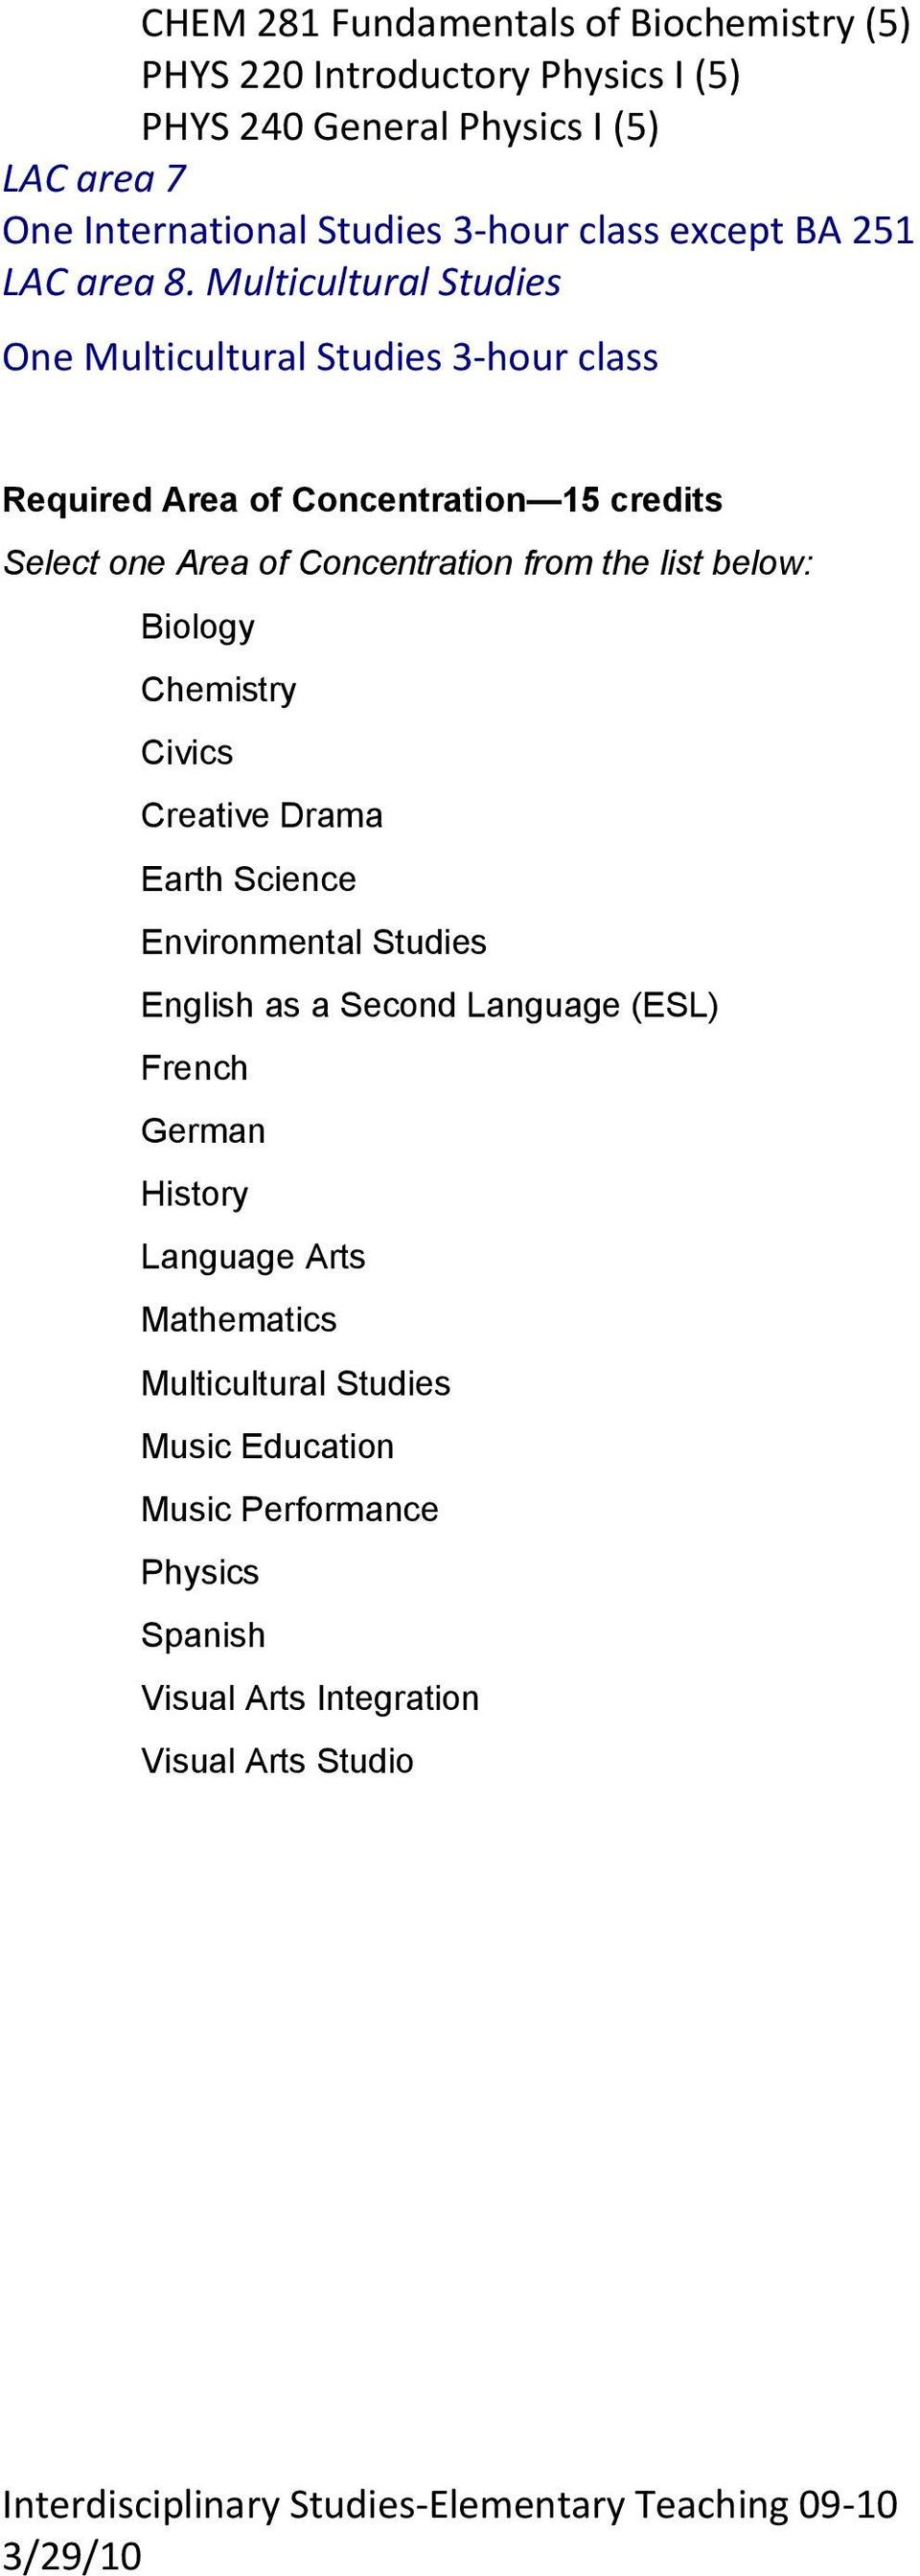 Multicultural Studies One Multicultural Studies 3-hour class Required Area of Concentration 15 credits Select one Area of Concentration from the list